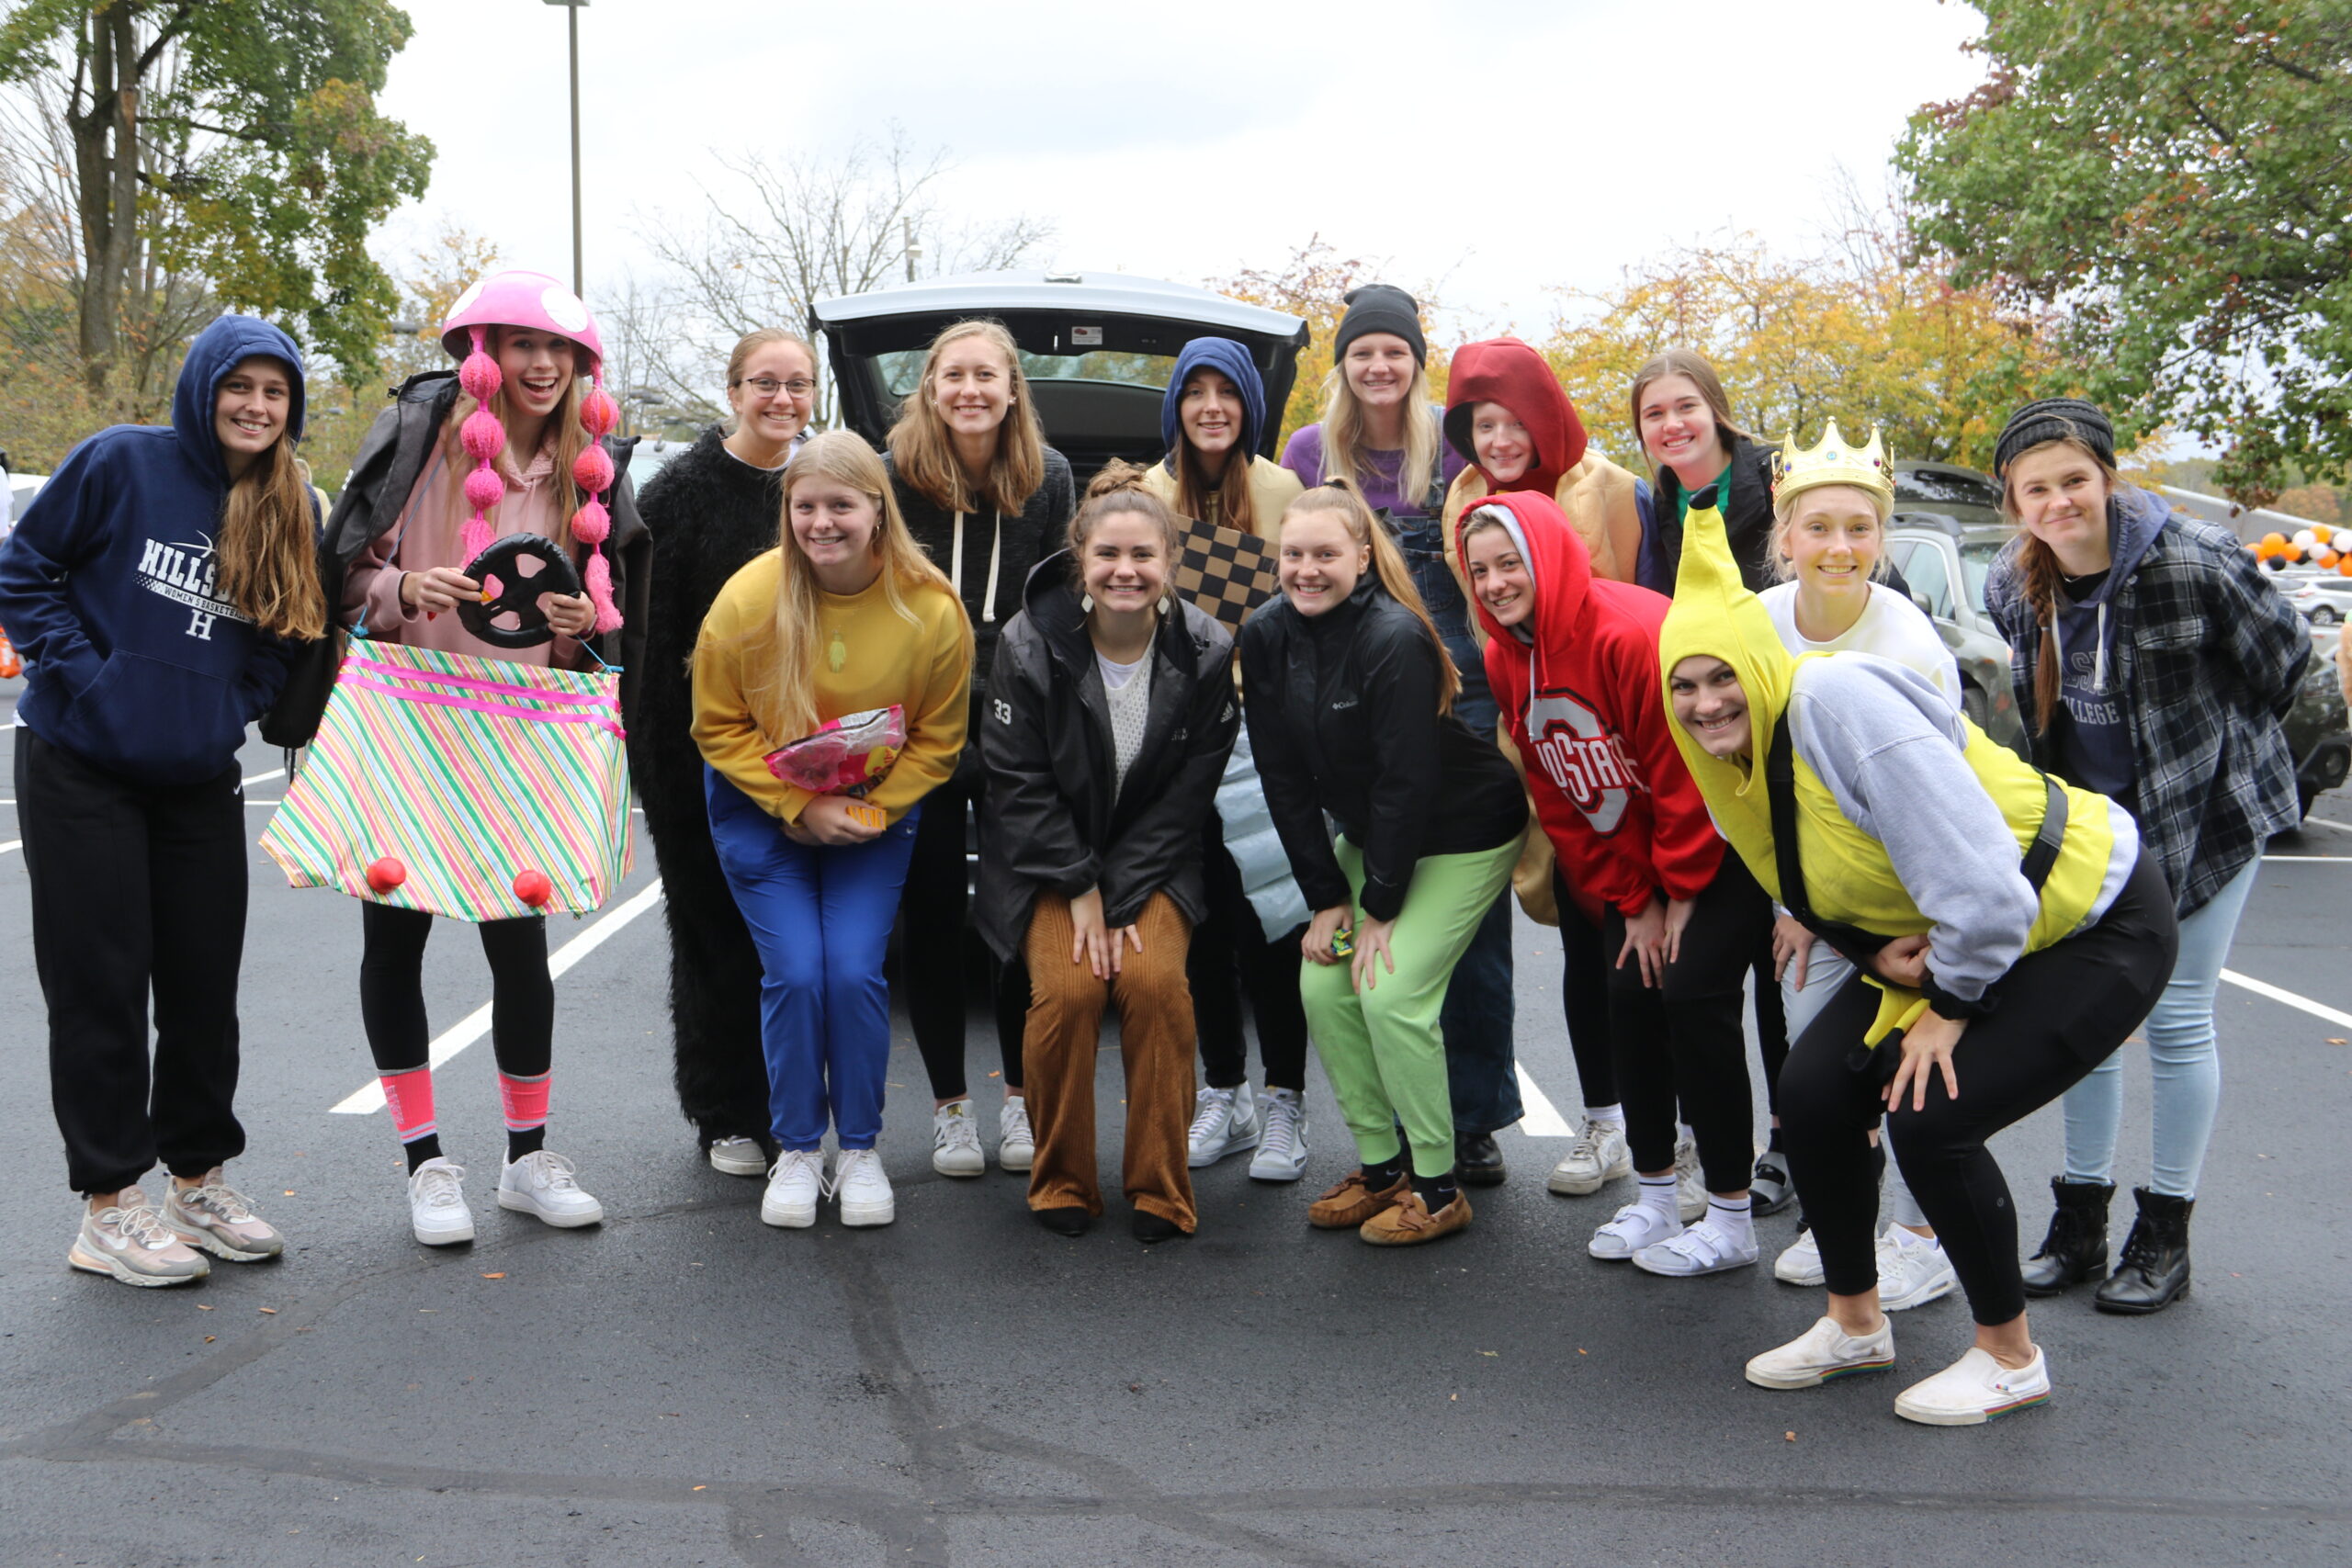 SAAC hosts its Trunk or Treat event for Make-A-Wish